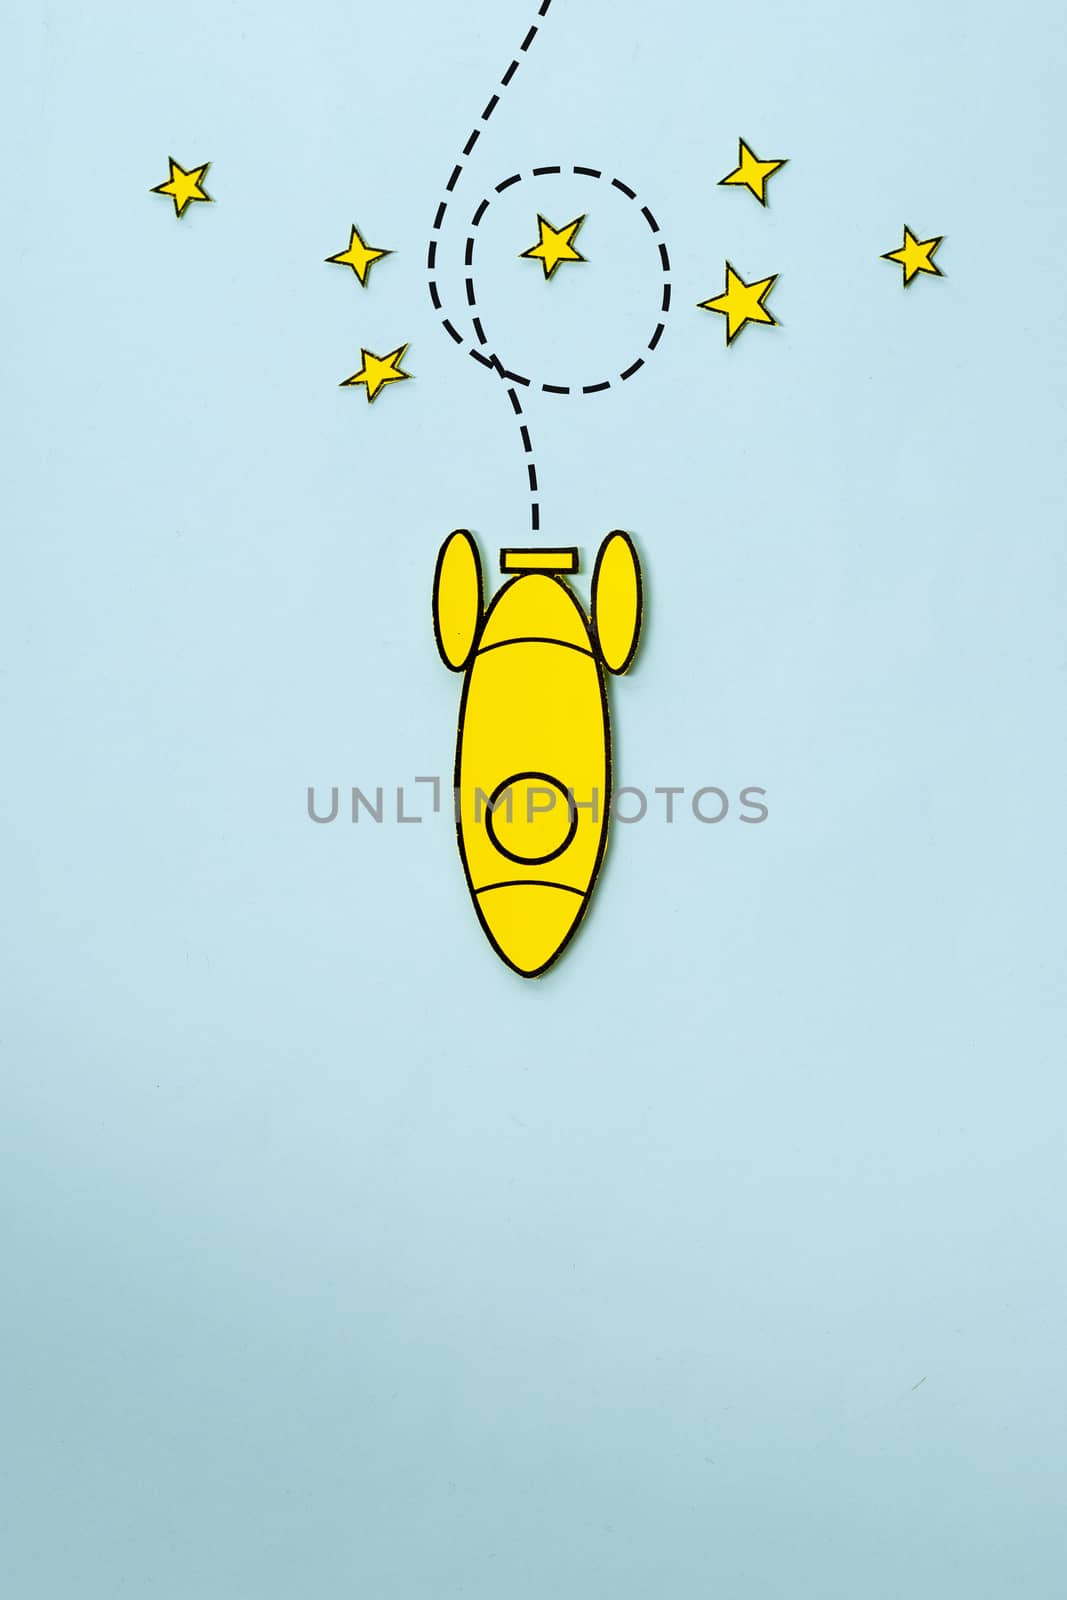 Little yellow rocket looping around stars on its way back to earth over a blue background with copy space